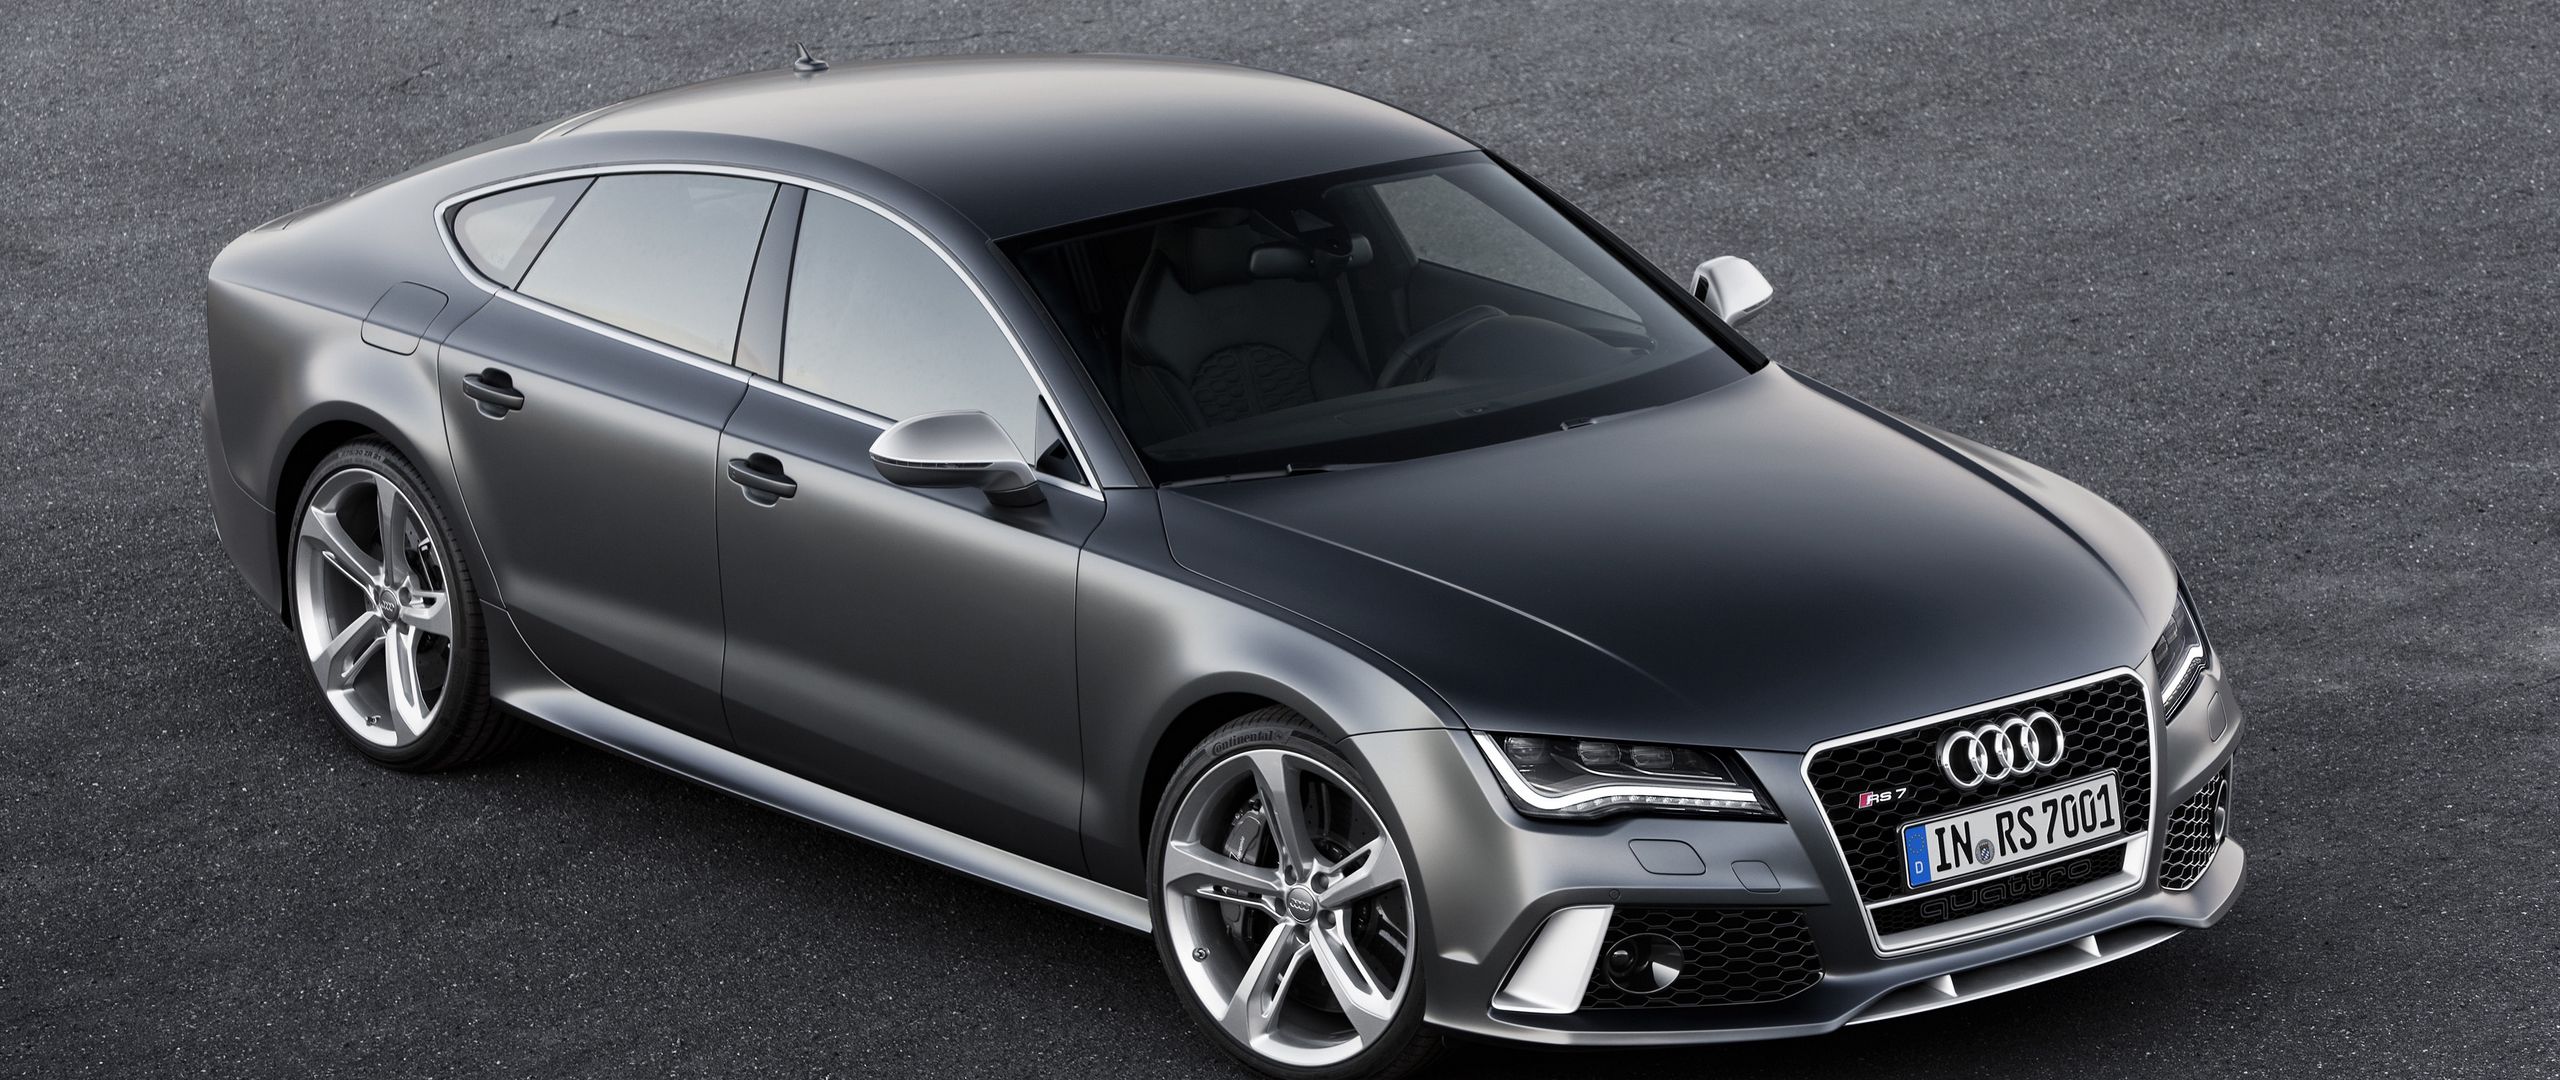 Download Wallpaper 2560x1080 Audi Rs7 Black Side View Dual Wide 1080p Hd Background